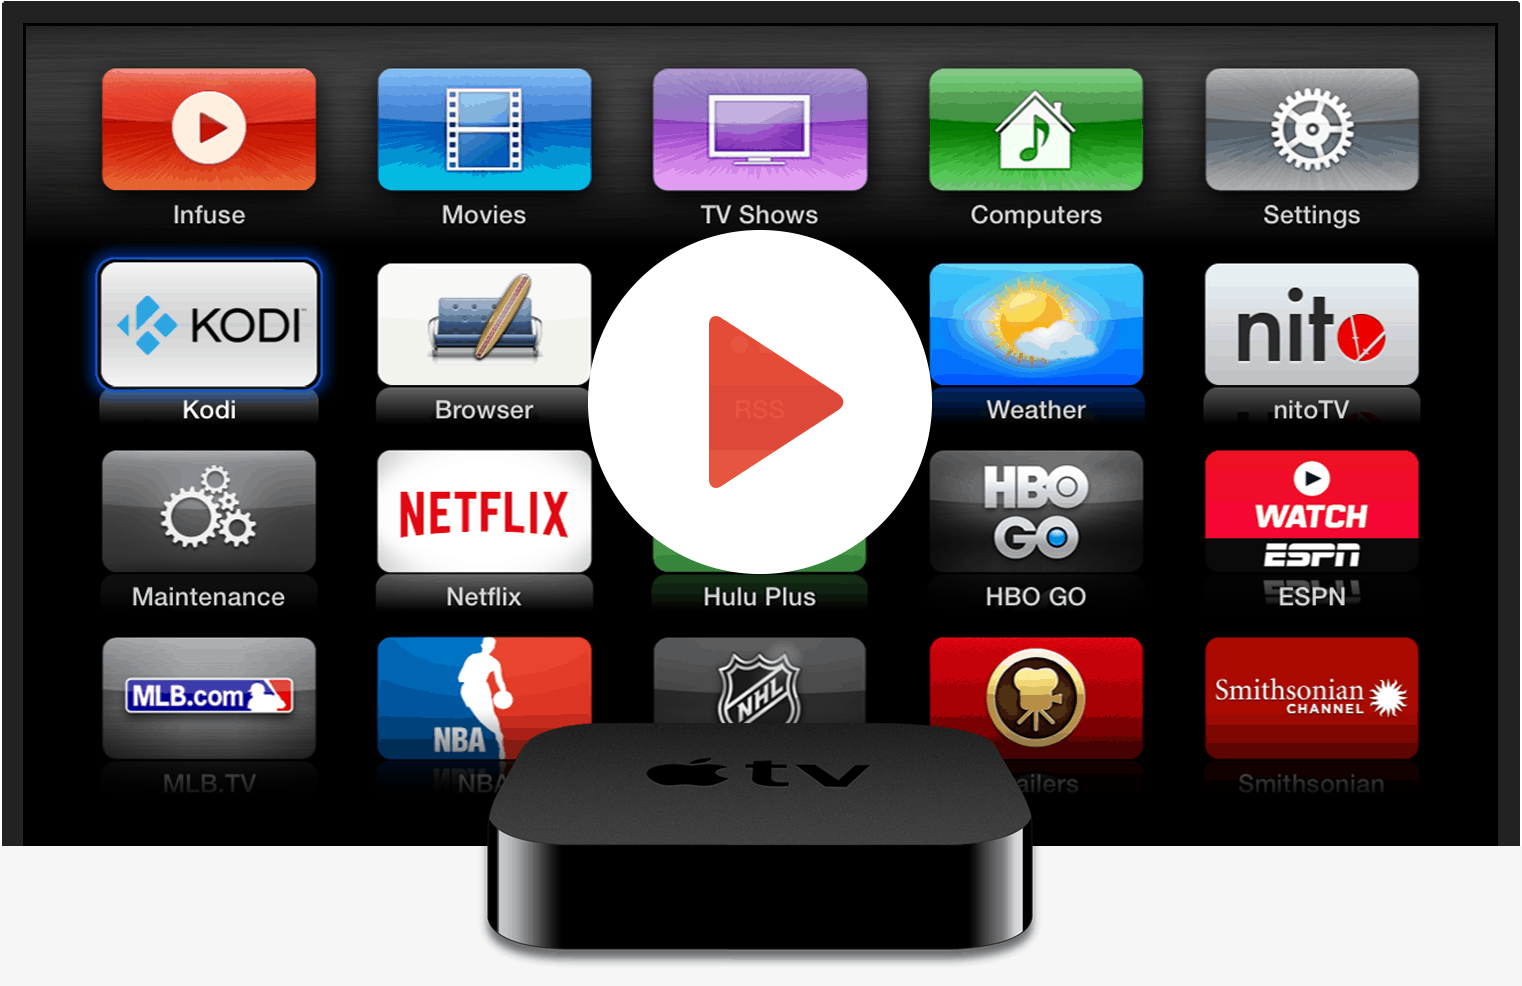 How to get YouTube back on your Apple TV (second gen)